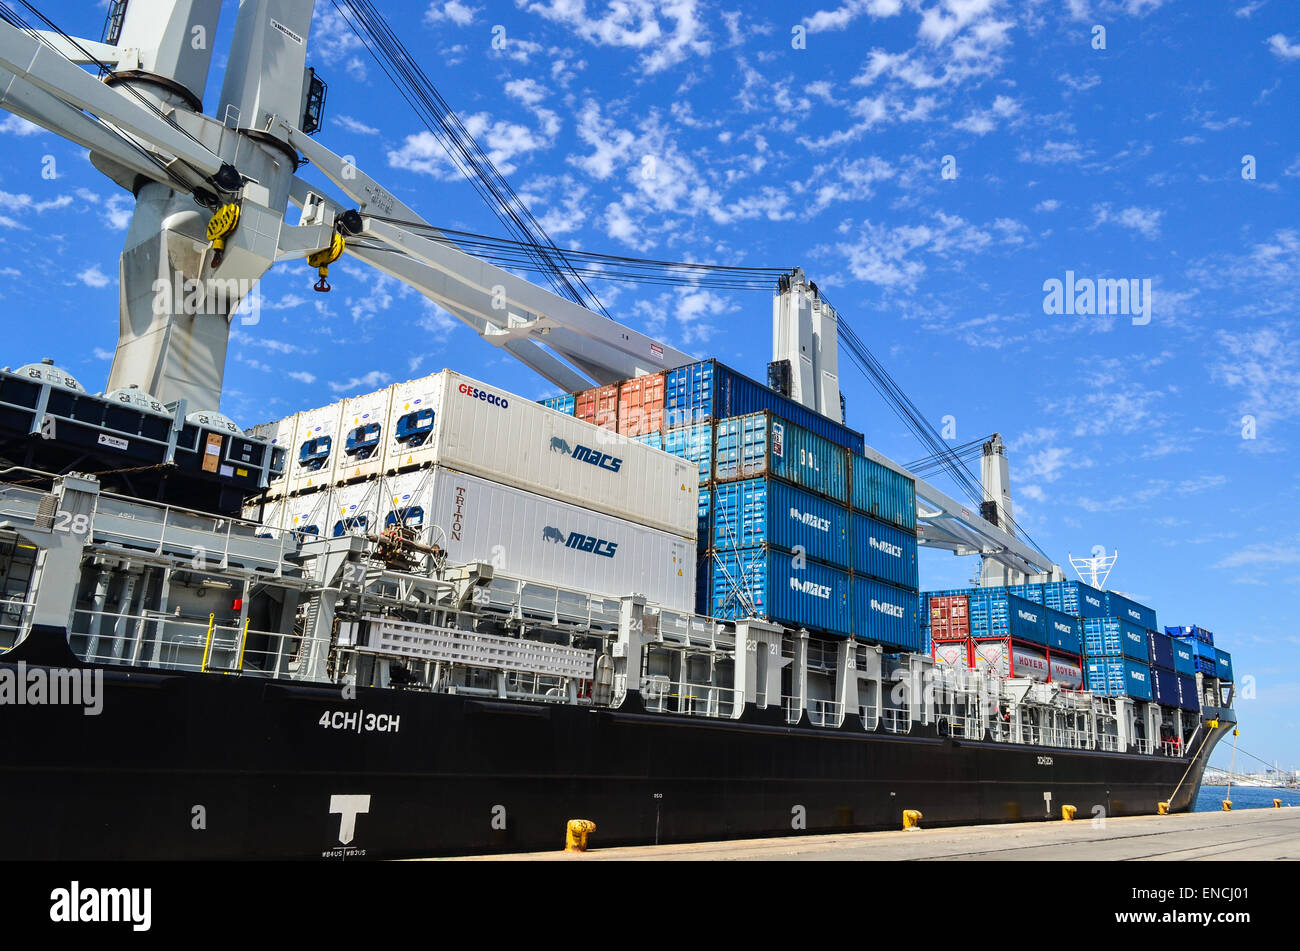 A container ship in the port of Cape Town, South Africa Stock Photo